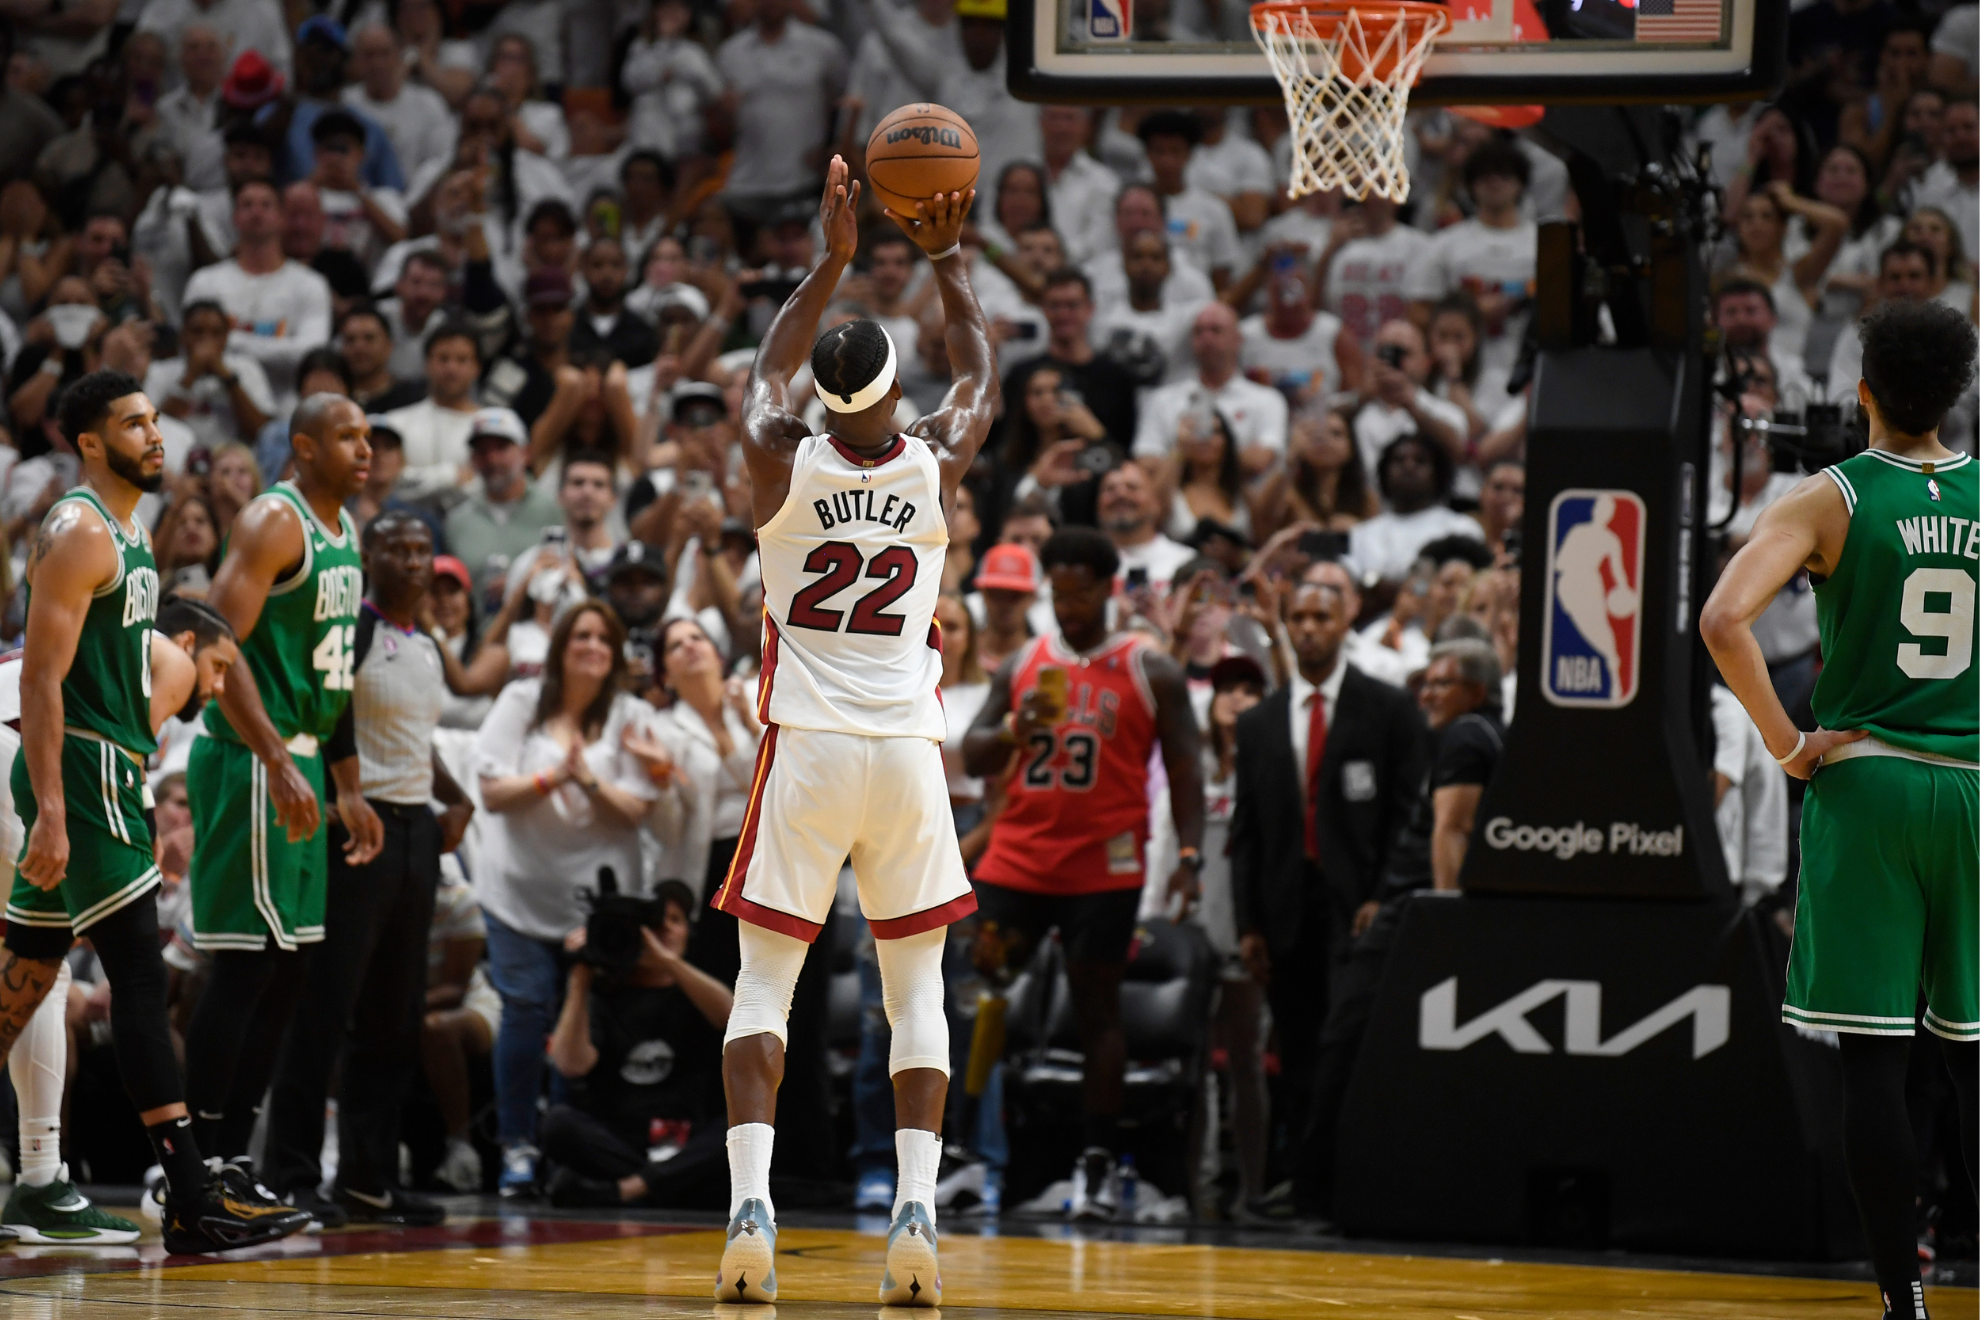 The Heat thought they were heading to the NBA Finals after Butler sank three free throws in the dying seconds of Game 6.